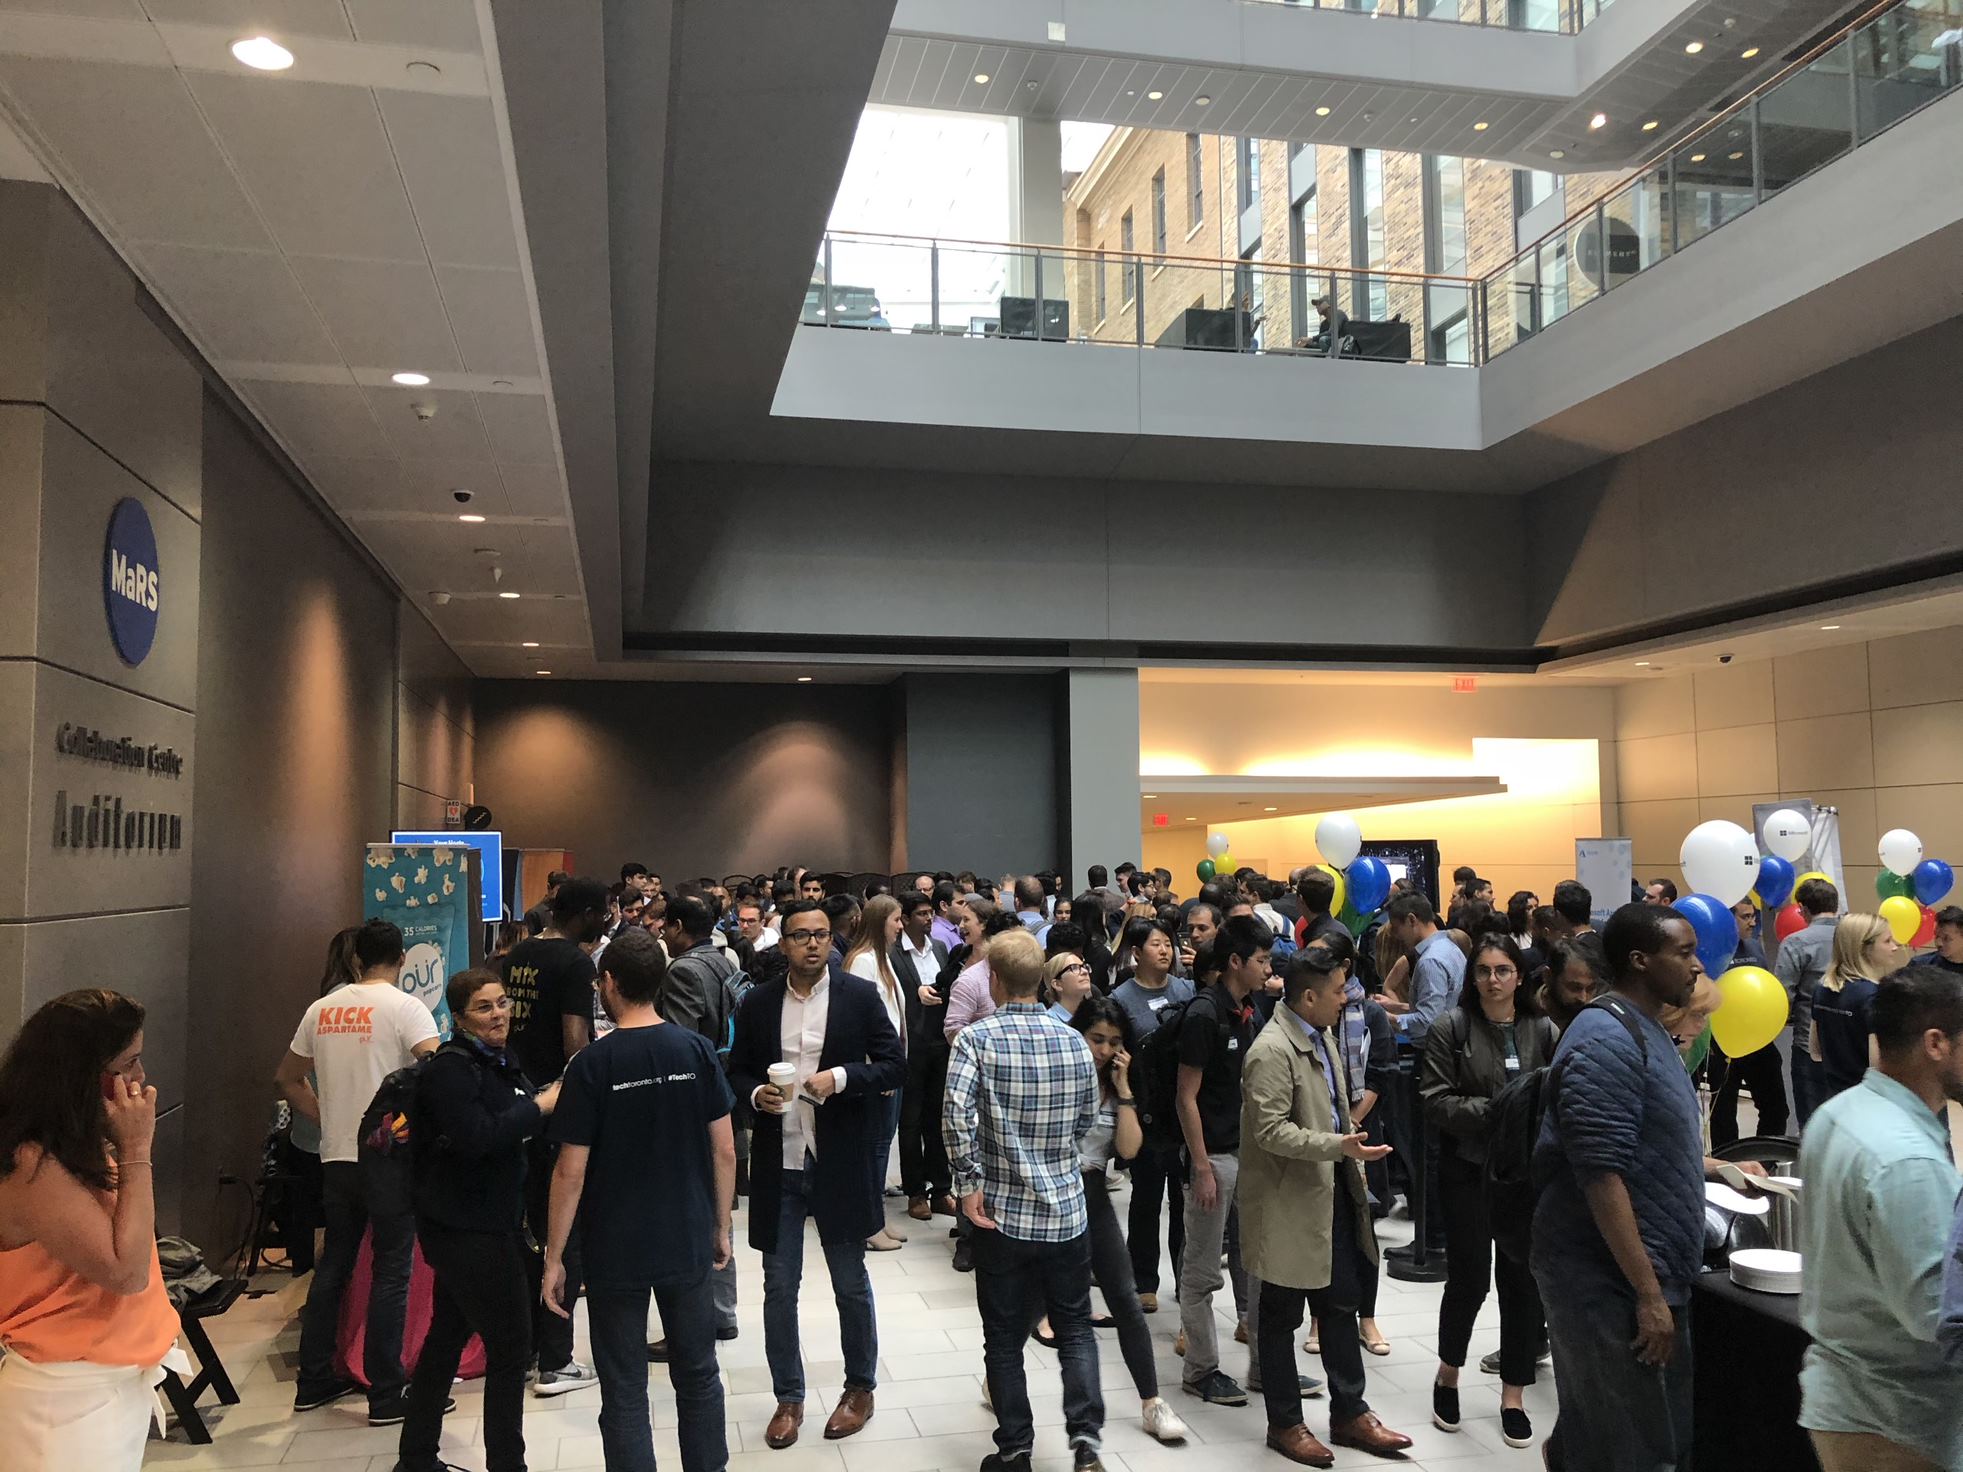 A photograph of the Microsoft AI mixer in the MaRs lobby